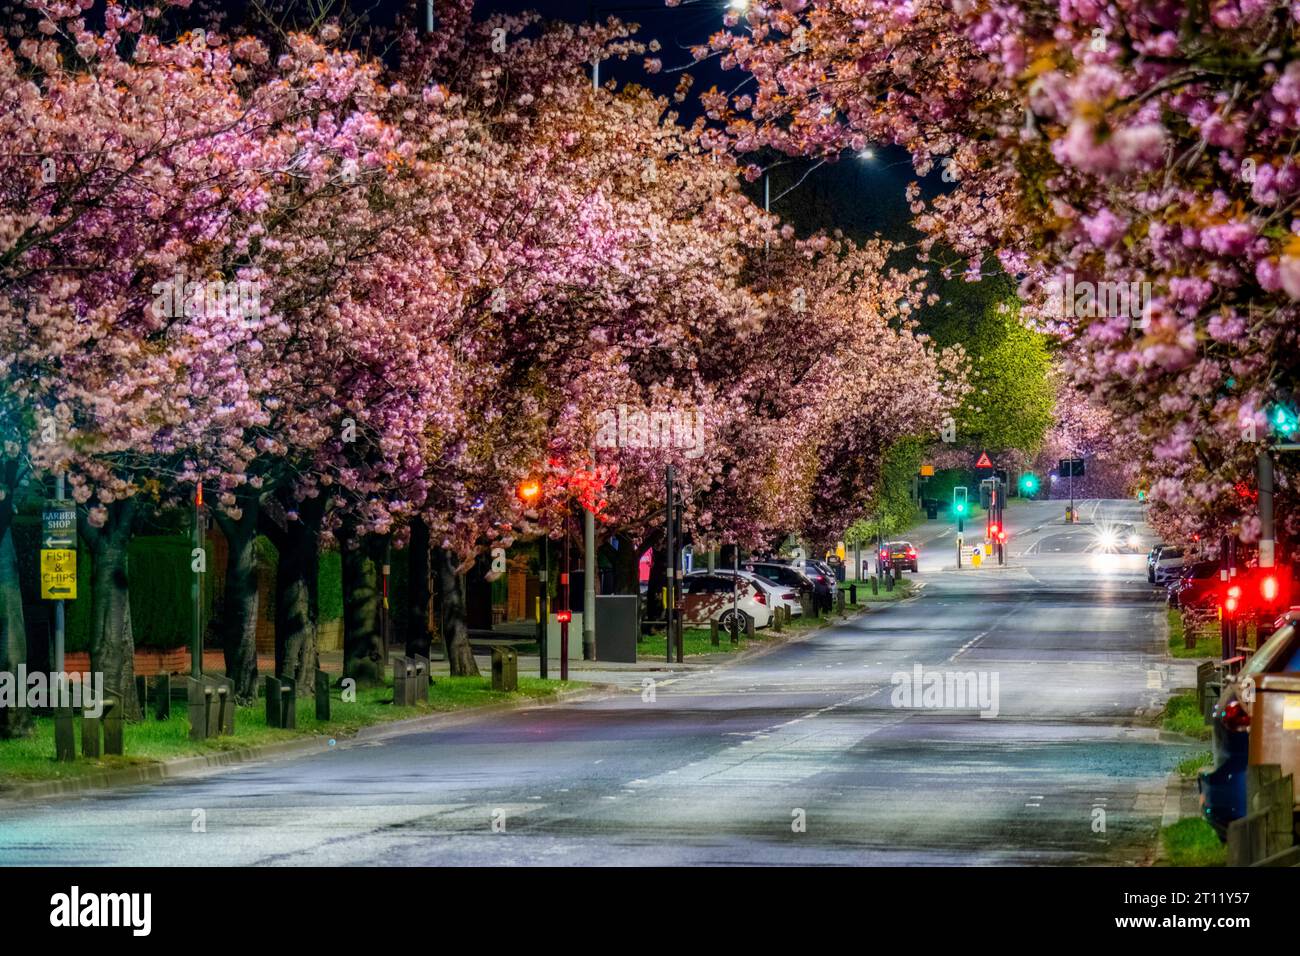 Trees with Pink Flowering Blossoms in Preston, Lancashire, UK (at Night) Stock Photo